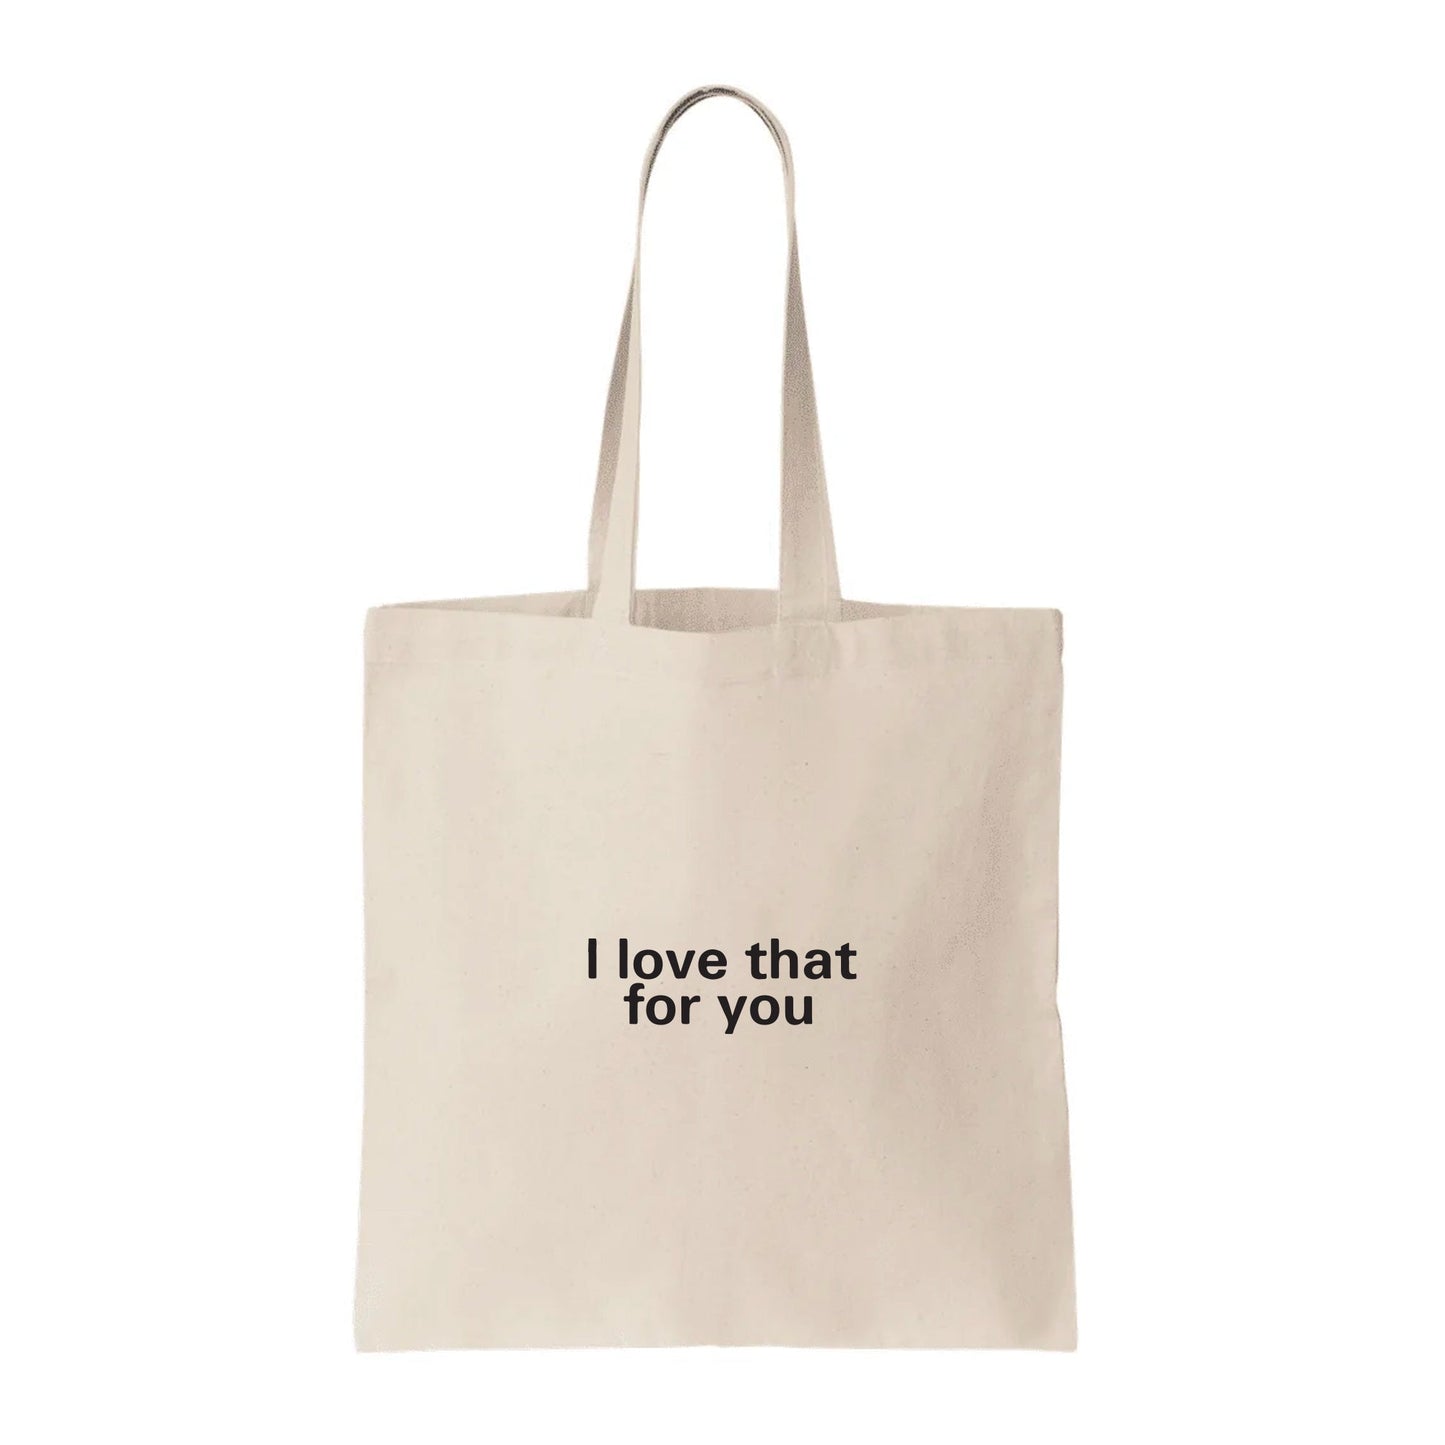 Malik Bazille: I love that for you tote